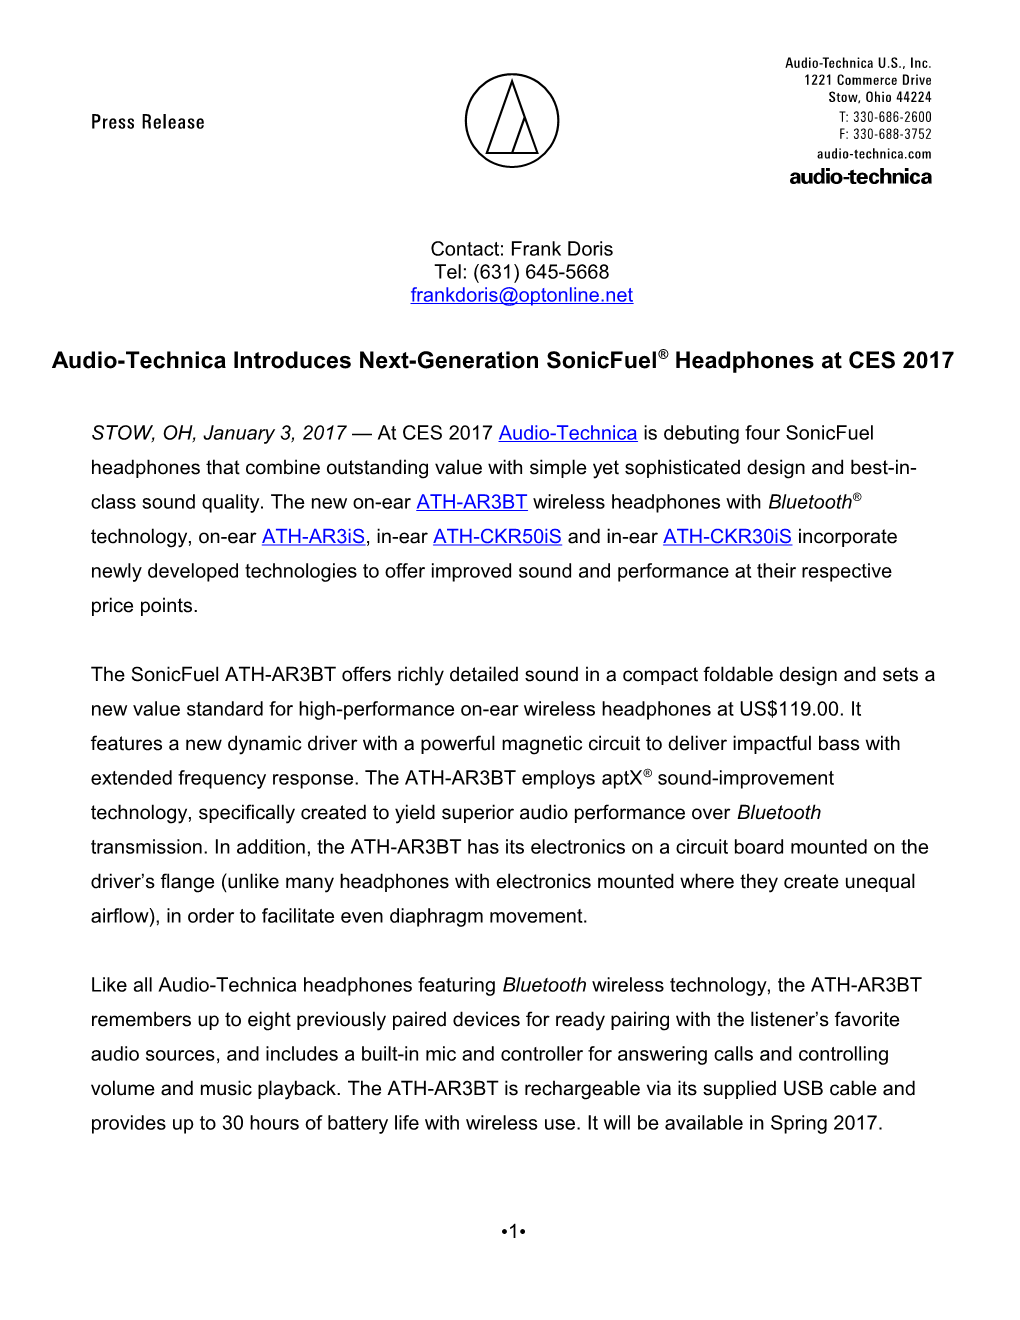 Audio-Technica ATH-ANC1 Mother's Day Press Release s1